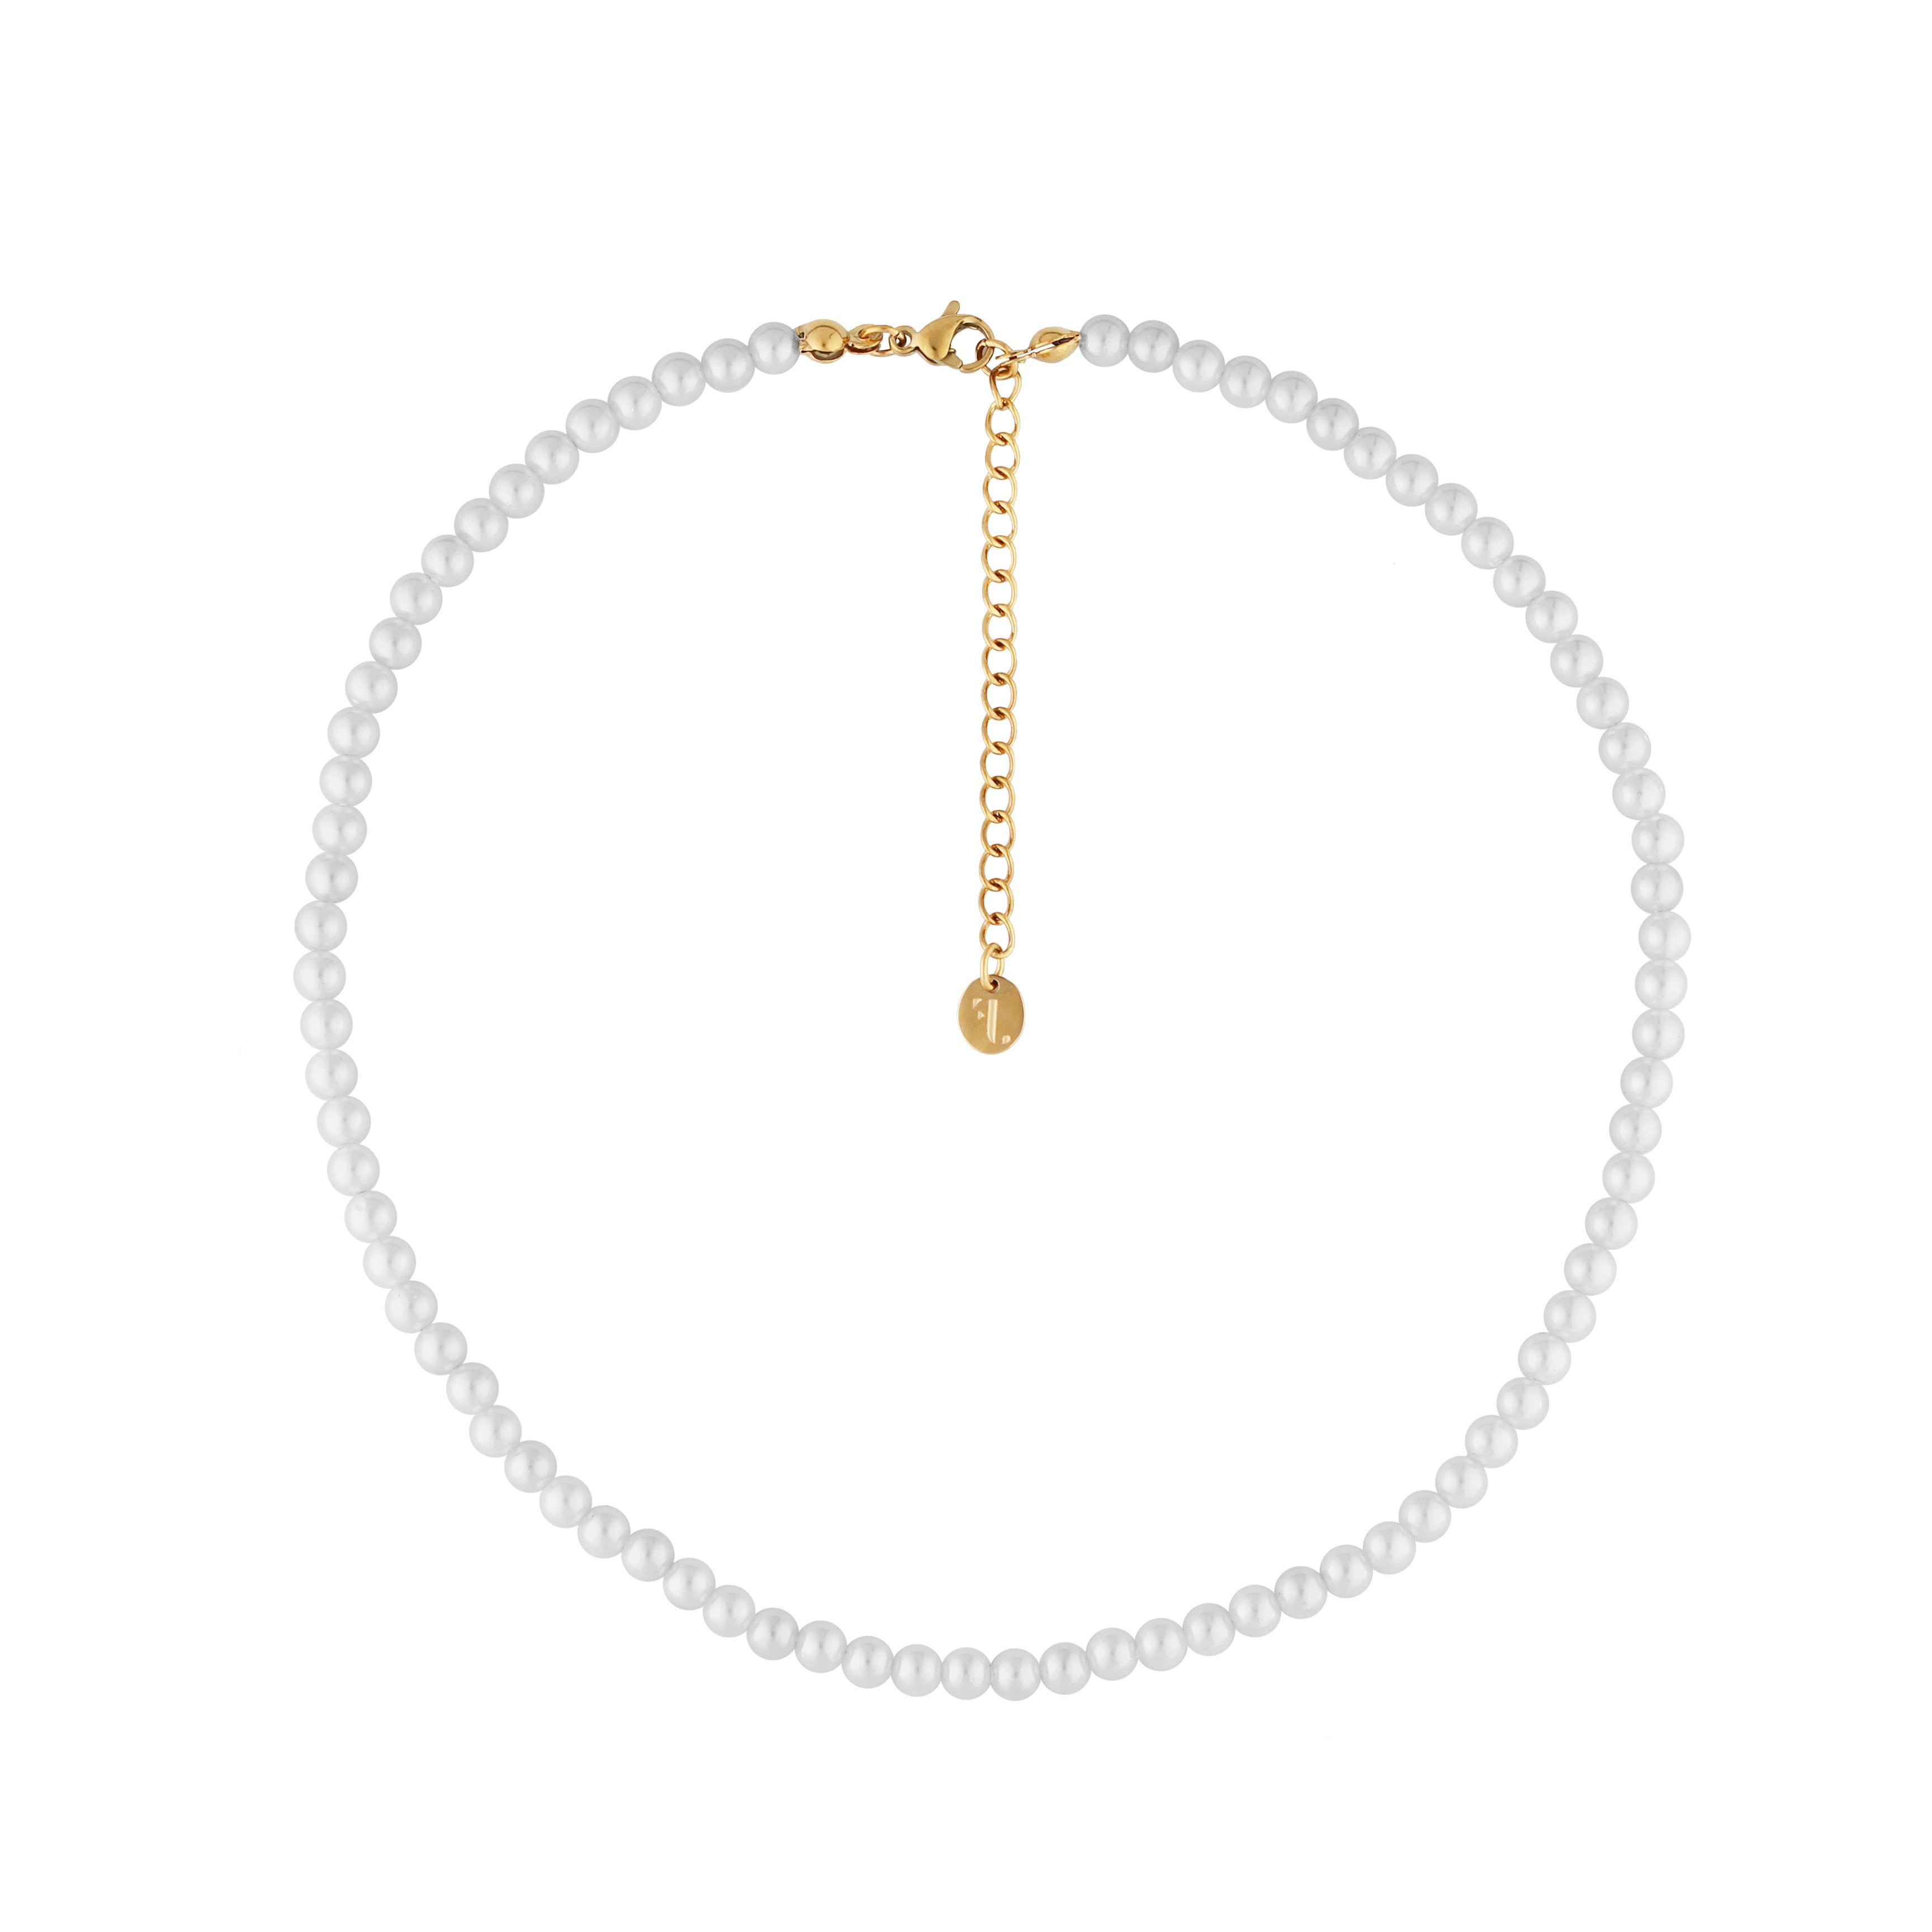 Baby Var men's necklace by Five Jwlry, designed with 4mm white glass bead pearls complemented by a silver or gold stainless steel buckle. Adjustable in size from 37cm to 42cm with a 5cm extension. Crafted from water-resistant 316L stainless steel. Hypoallergenic with a 2-year warranty.